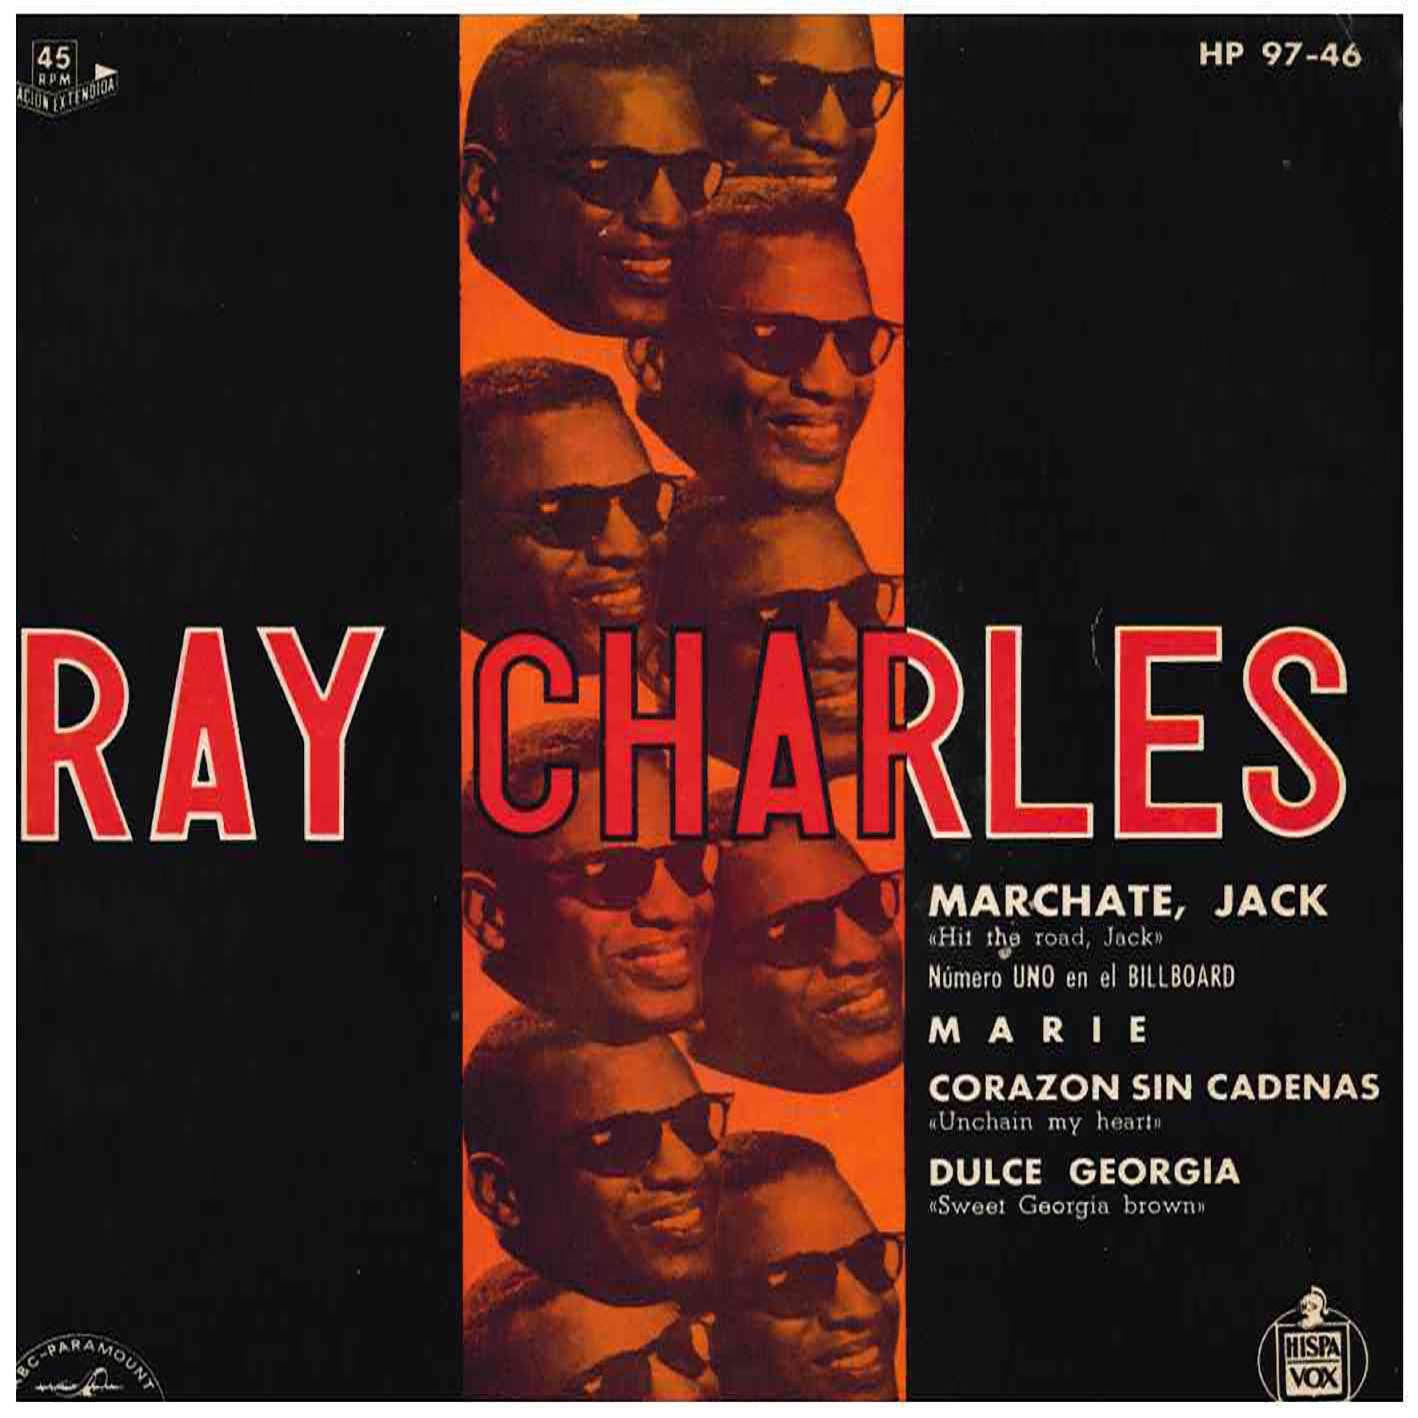 Ray Charles – Hit The Road, Jack